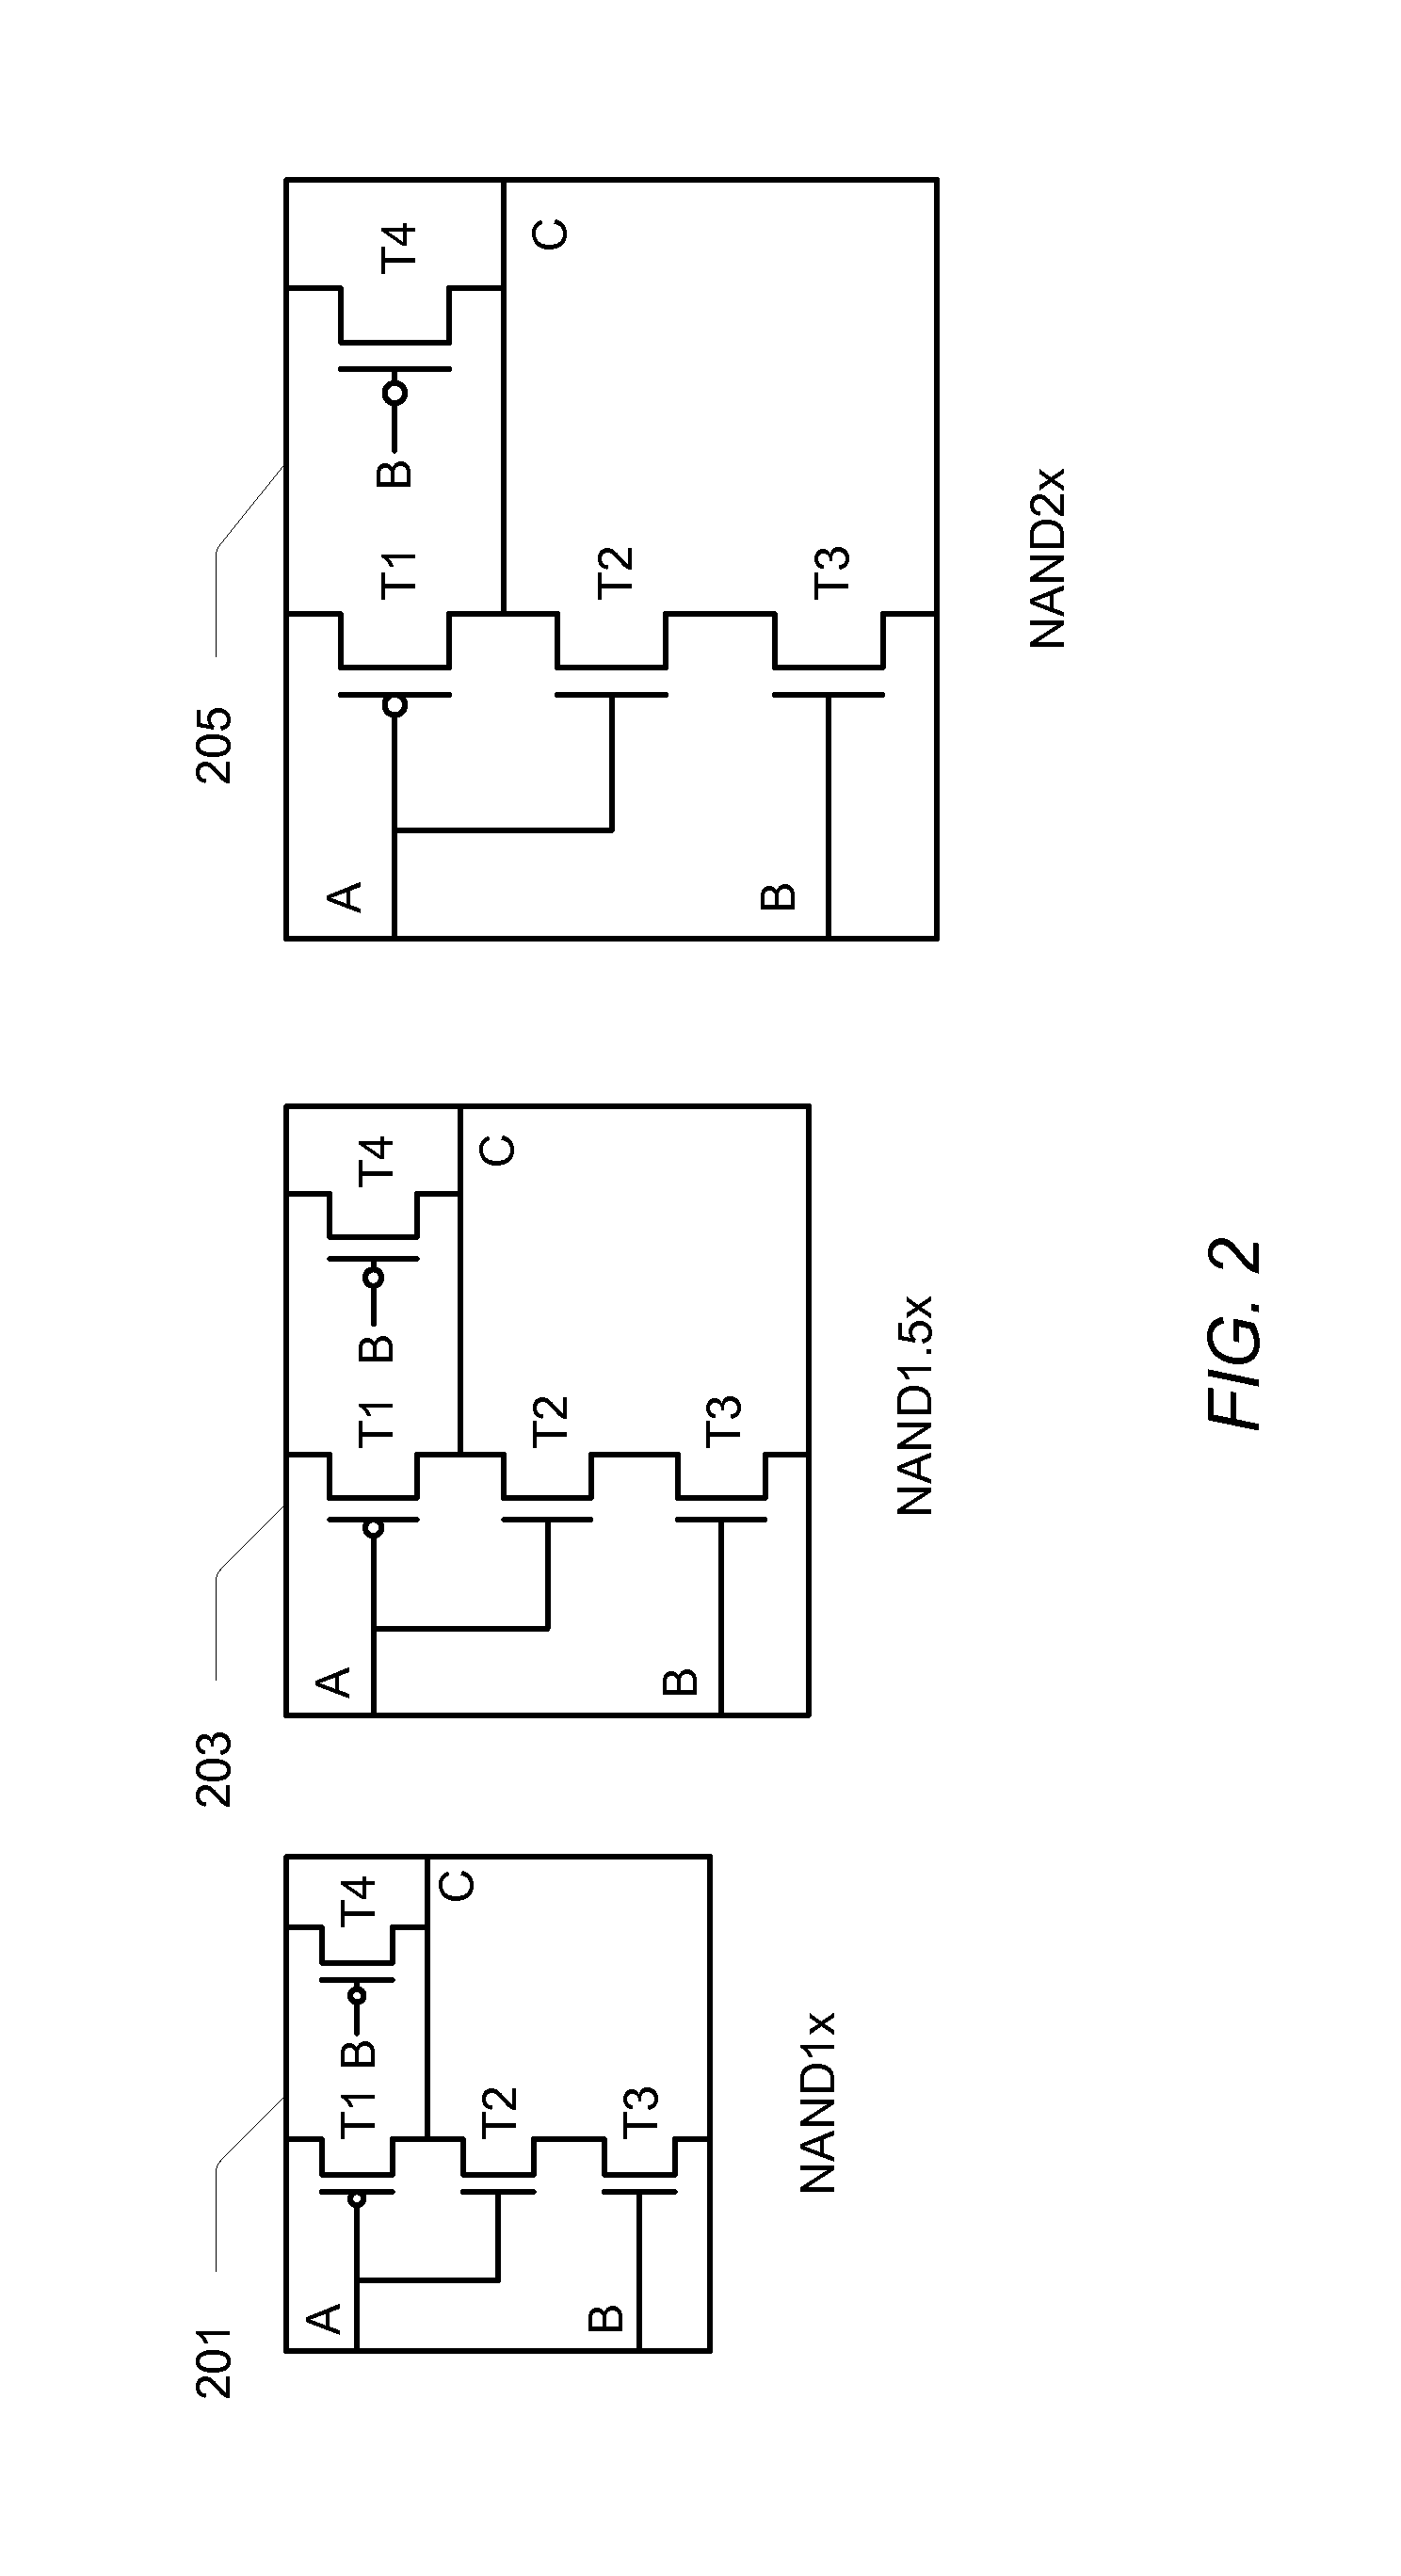 Reducing Narrow Gate Width Effects in an Integrated Circuit Design